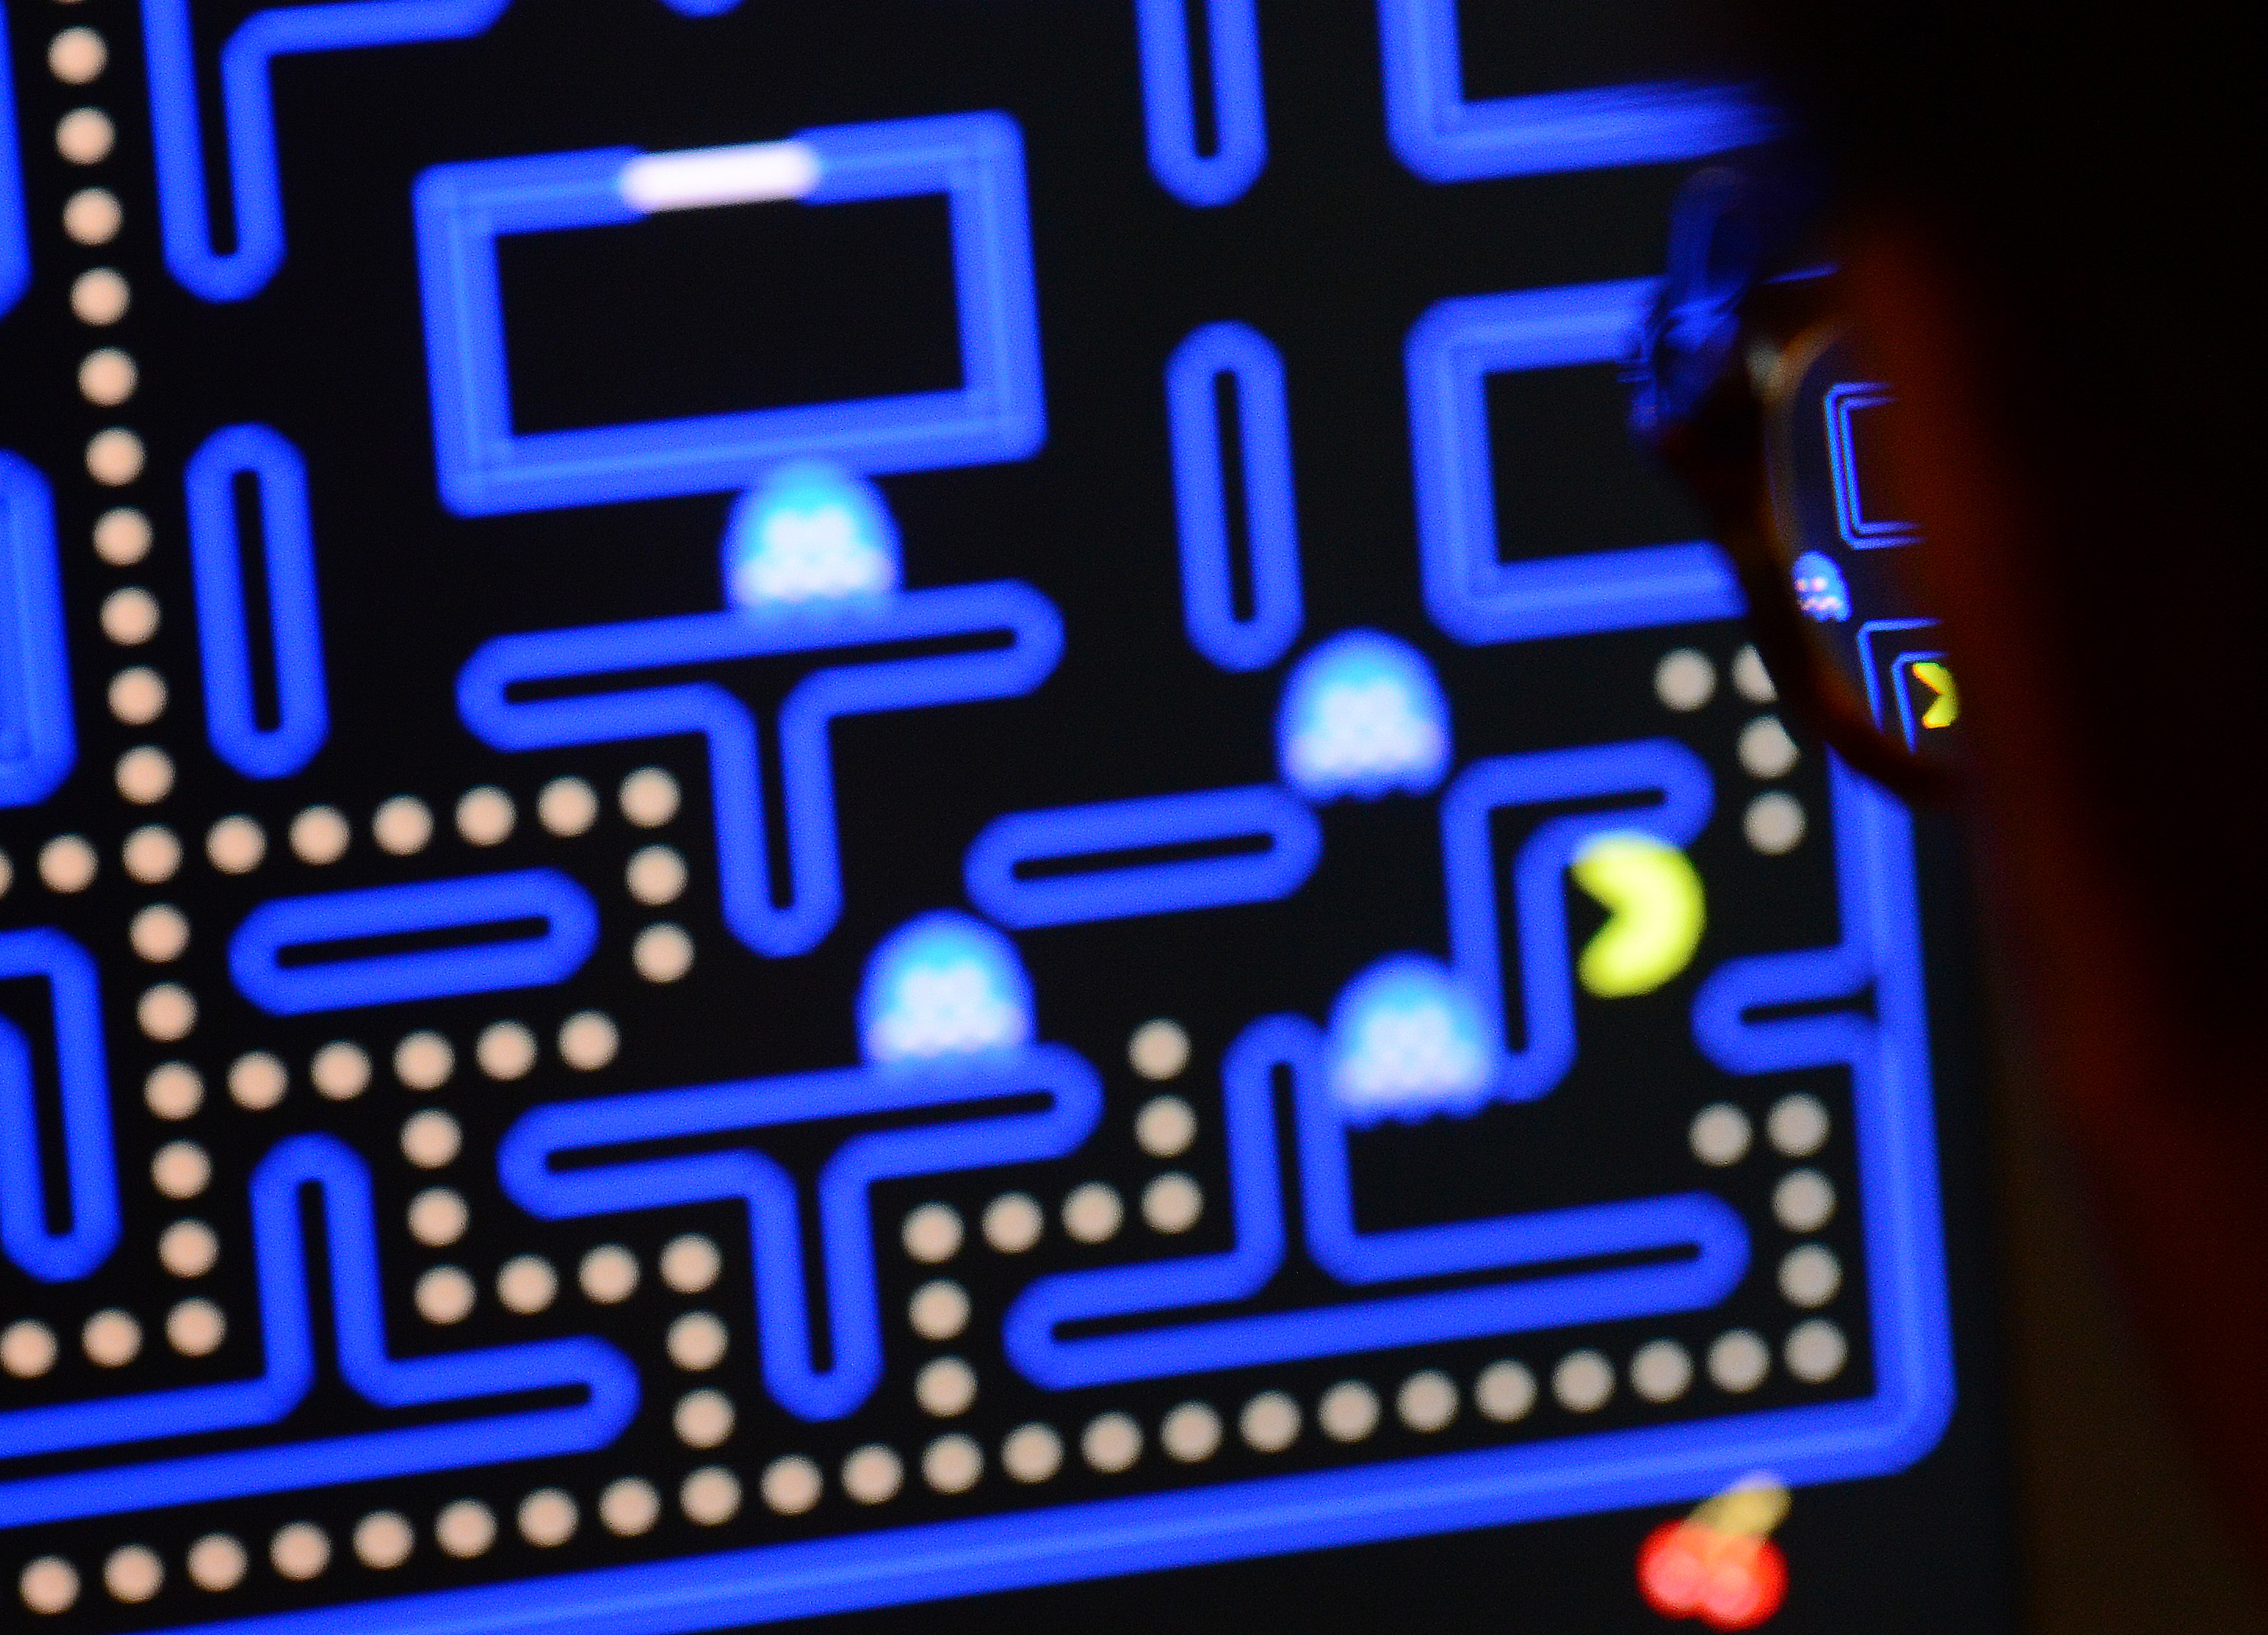 An employee plays the video game Pac-Man (1980) during an exhibition preview featuring 14 video games acquired by The Museum of Modern Art (MoMA)  in New York, March 1, 2013. (Emmanuel Dunand&mdash;AFP/Getty Images)